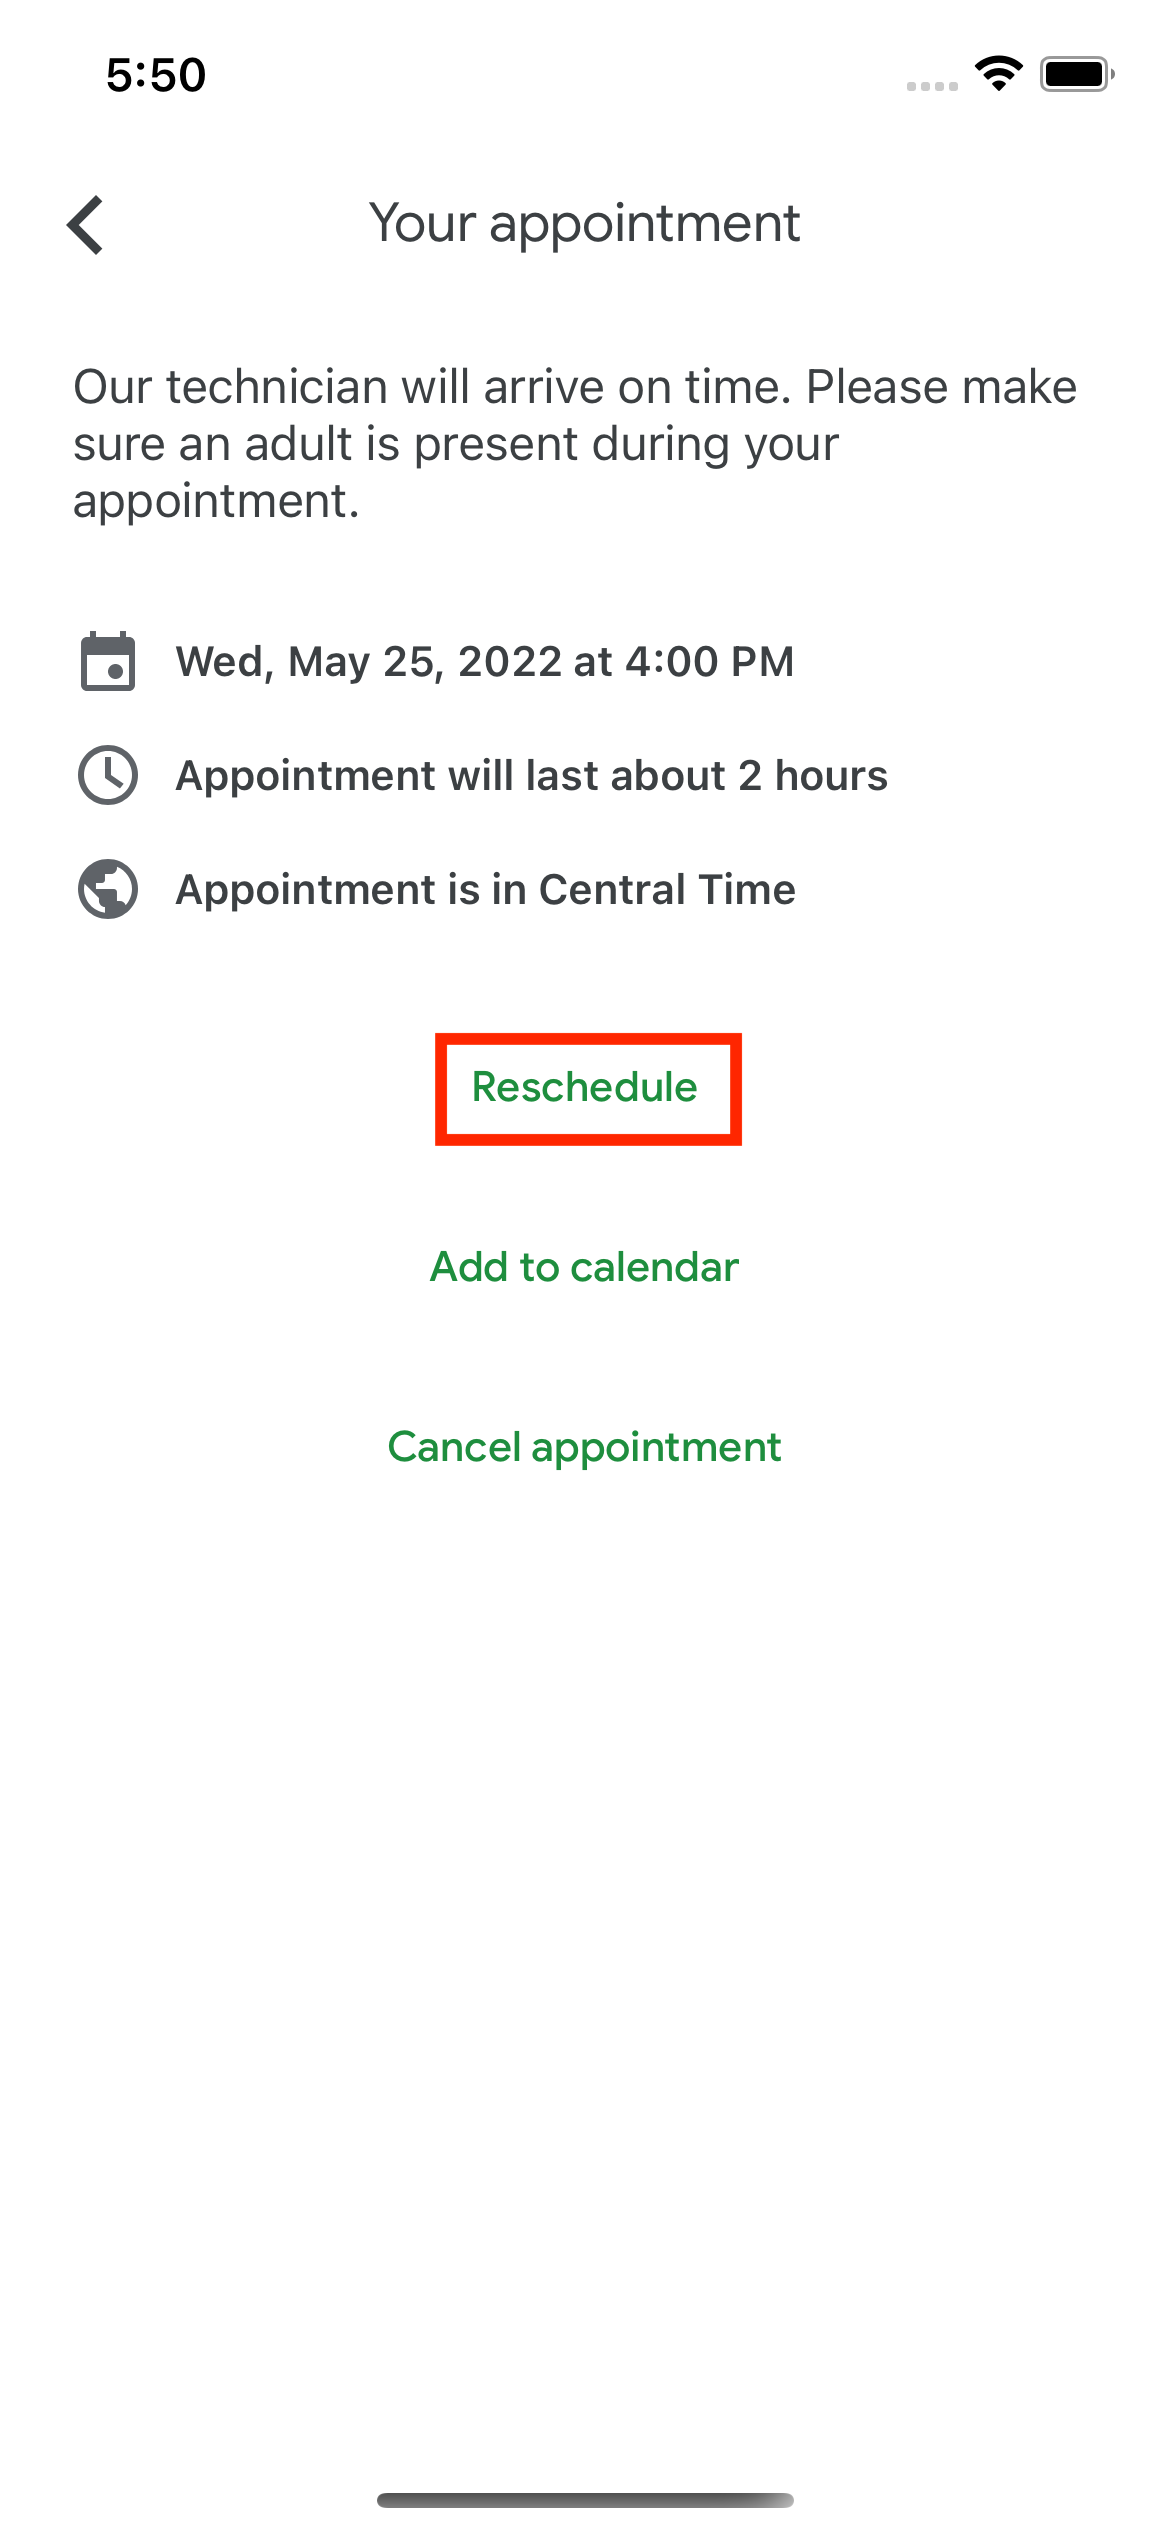 The Google Fiber app "your appointment" screen. There are three links at the bottom: "Reschedule" (circled in red), "Add to calendar," and "Cancel appointment".